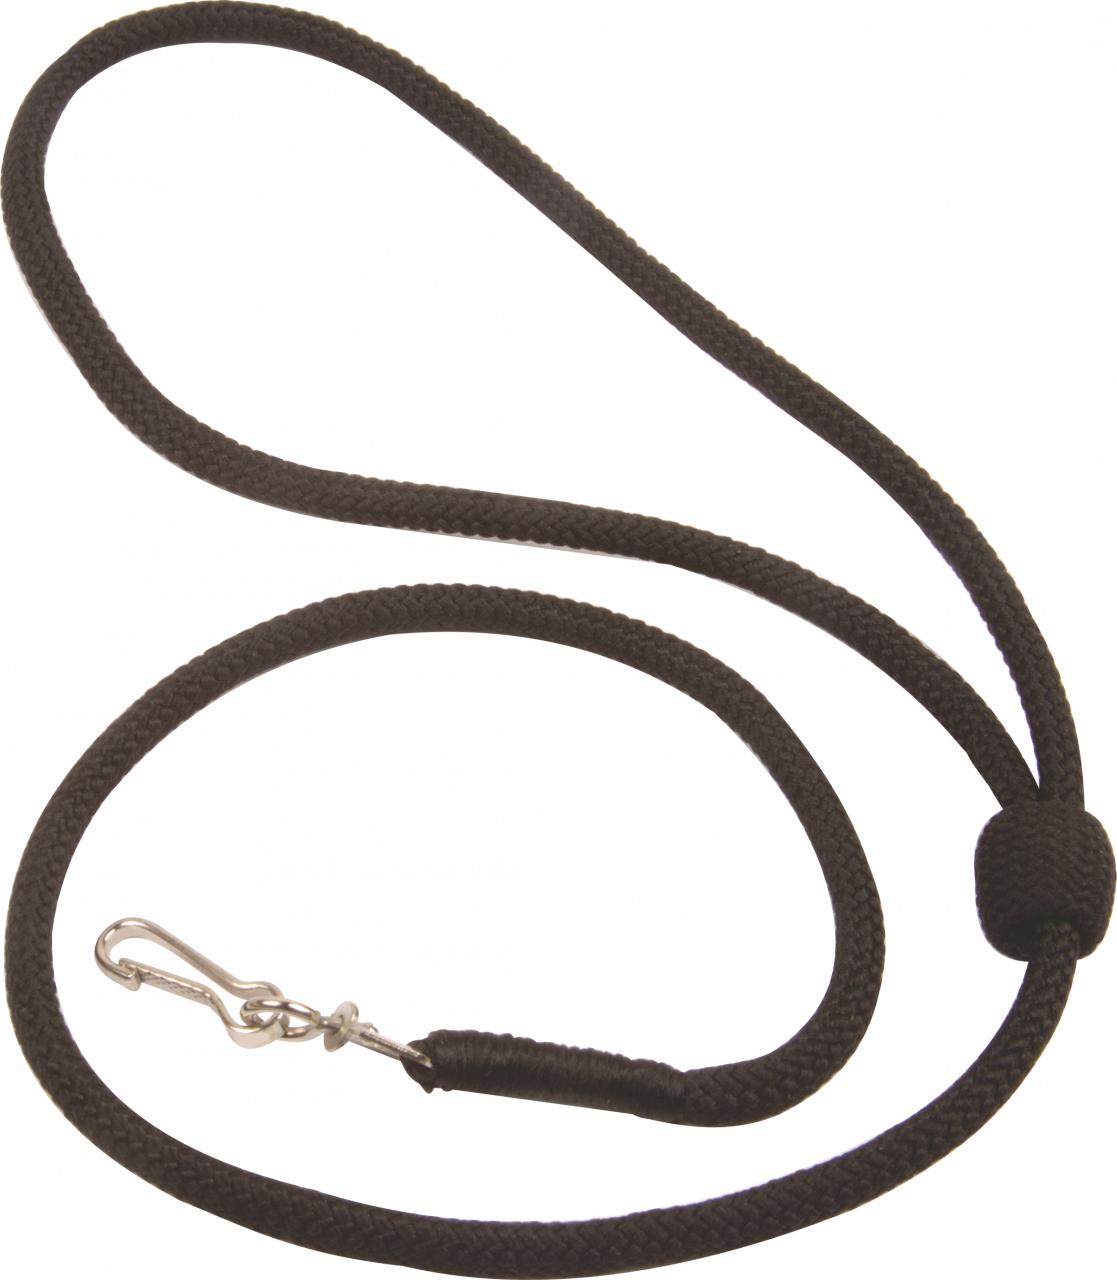 Security Lanyard. Avail in Black, Navy or Red